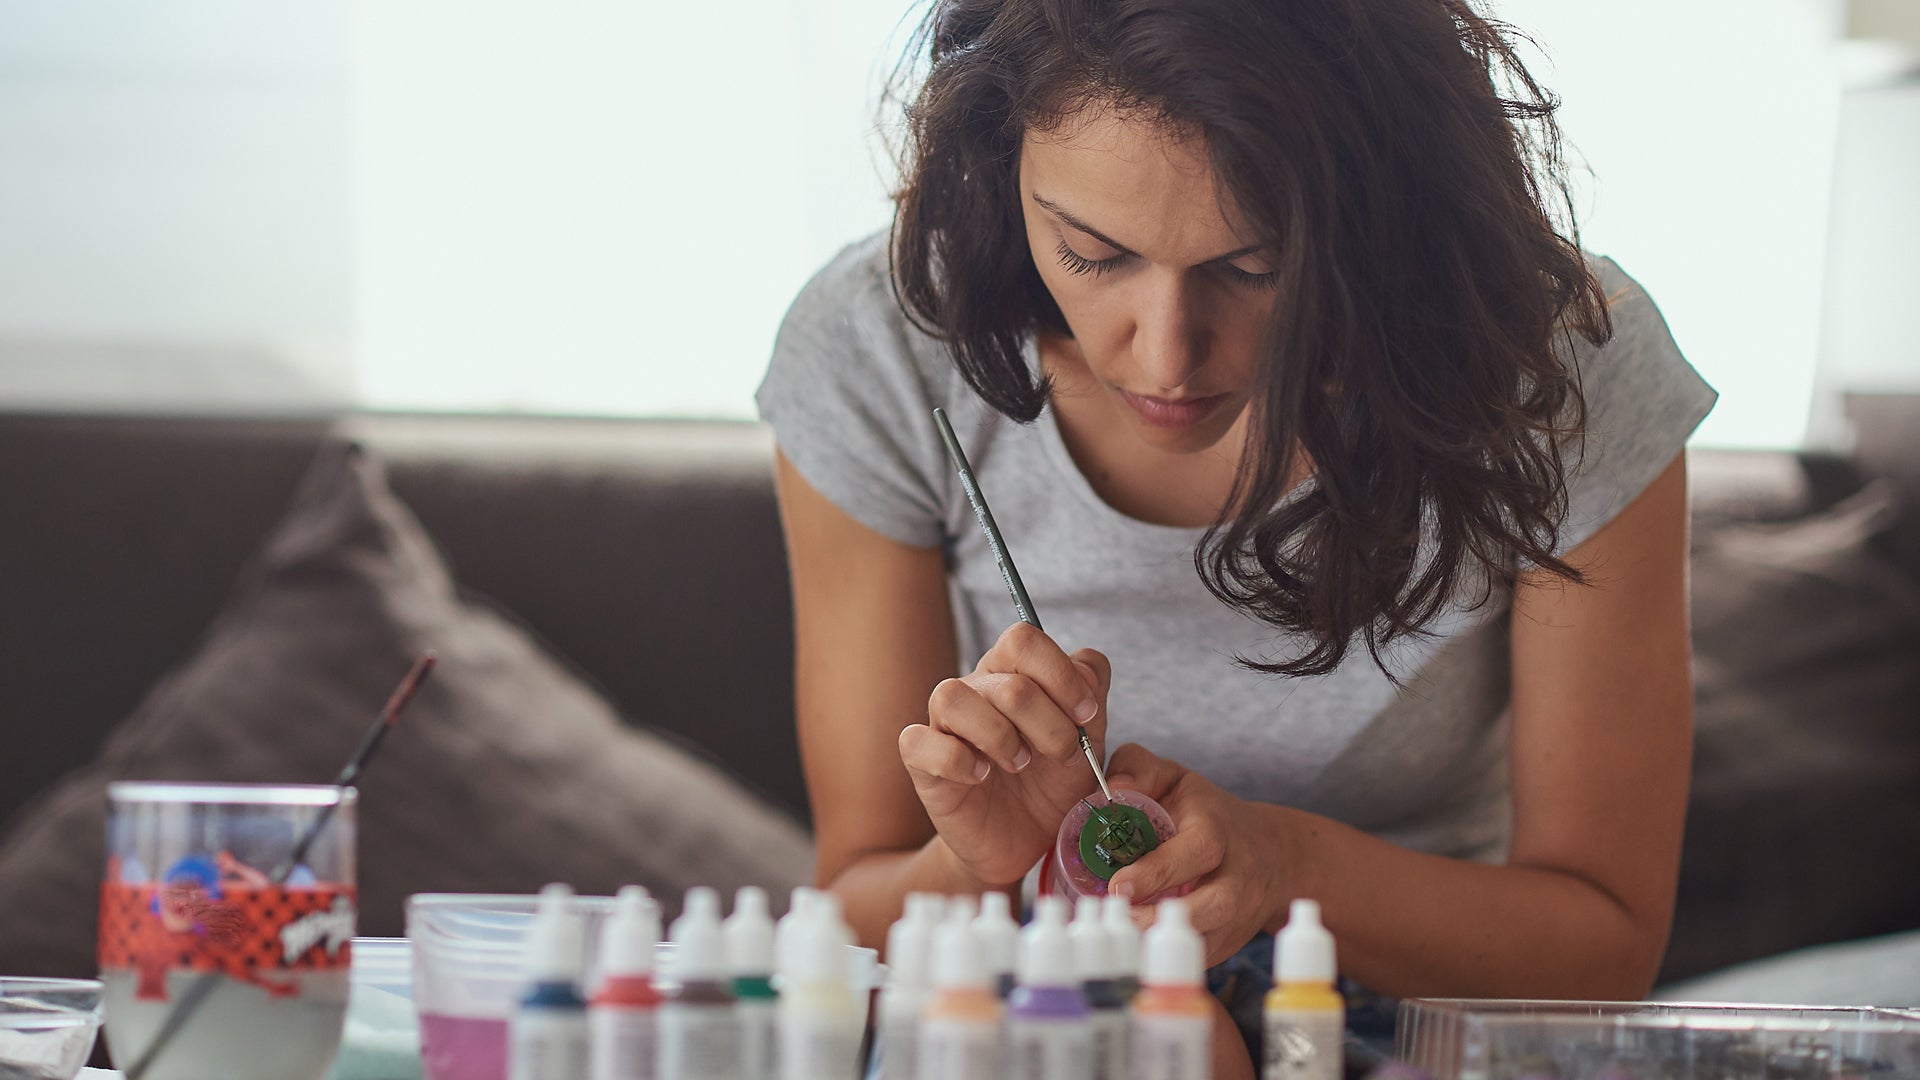 How to paint miniatures A stepbystep beginner’s guide